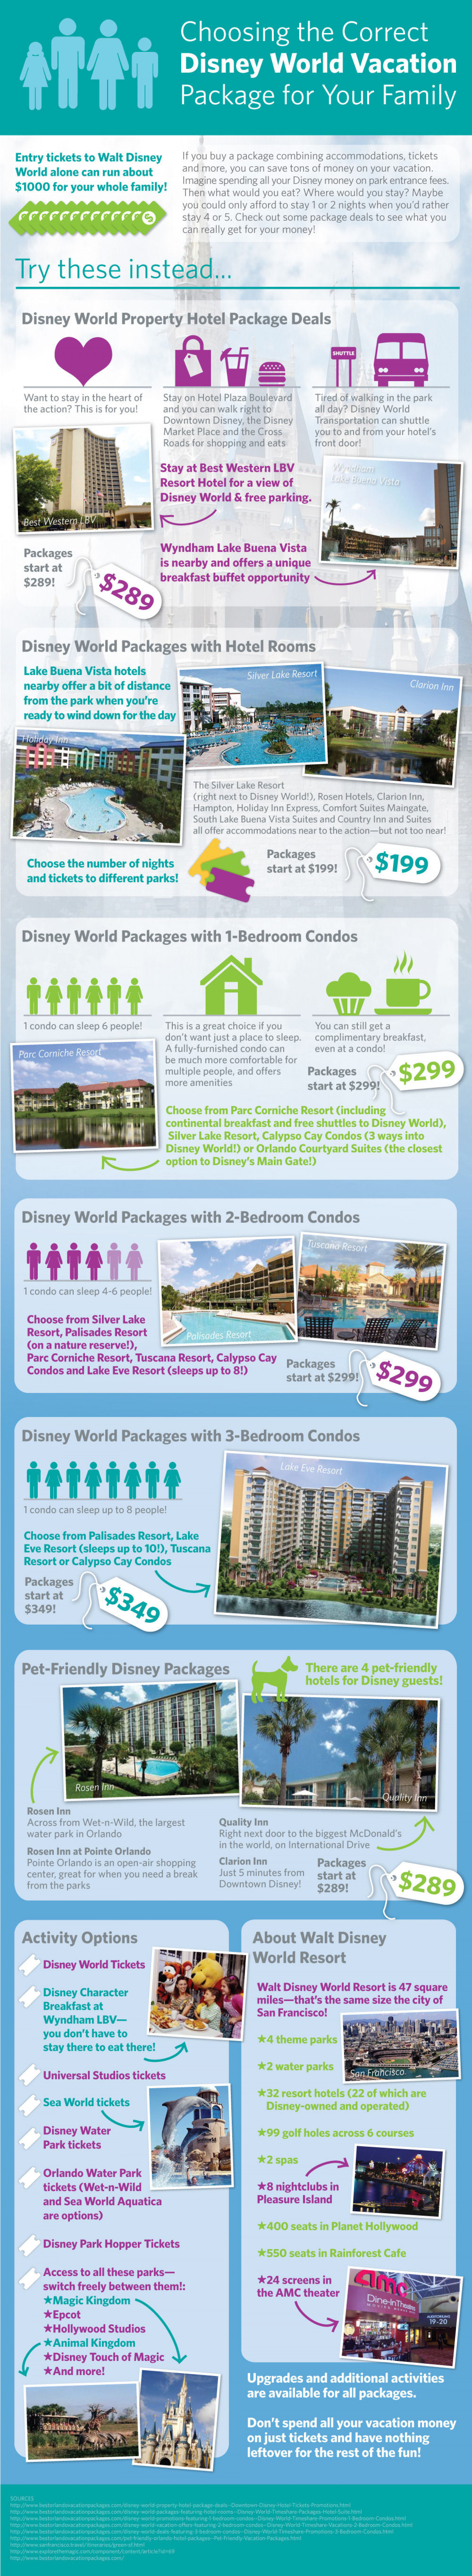 Choosing the Correct Disney World Vacation Package for your Family Infographic